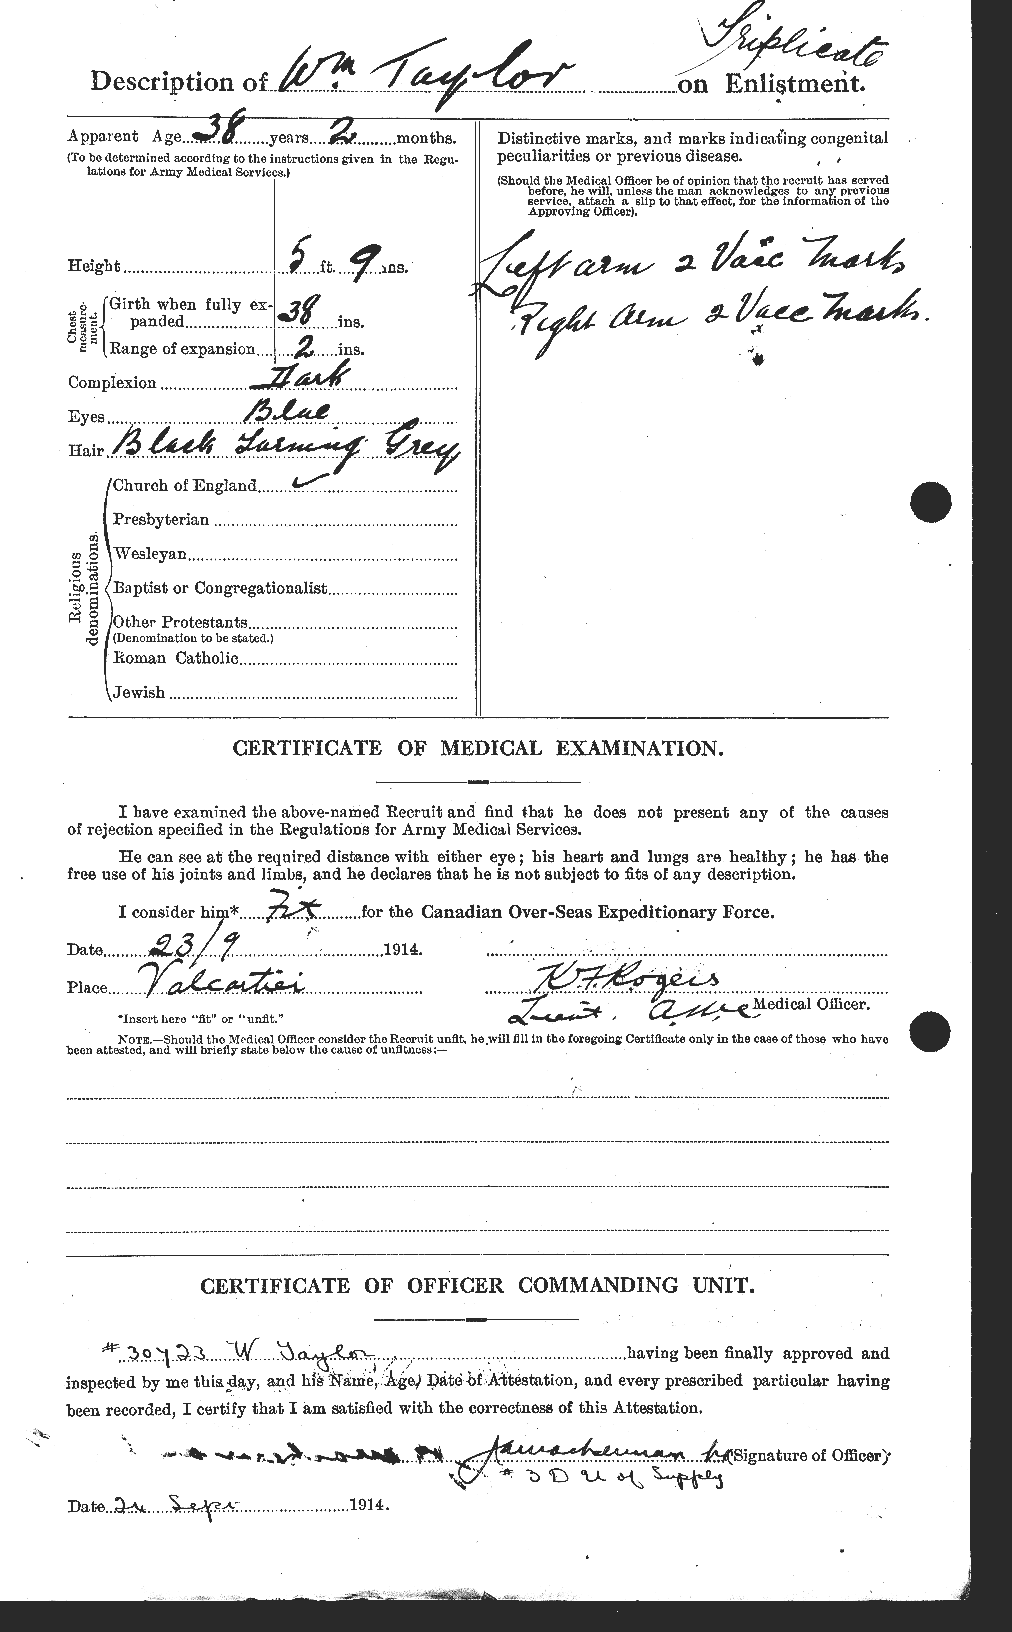 Personnel Records of the First World War - CEF 628107b